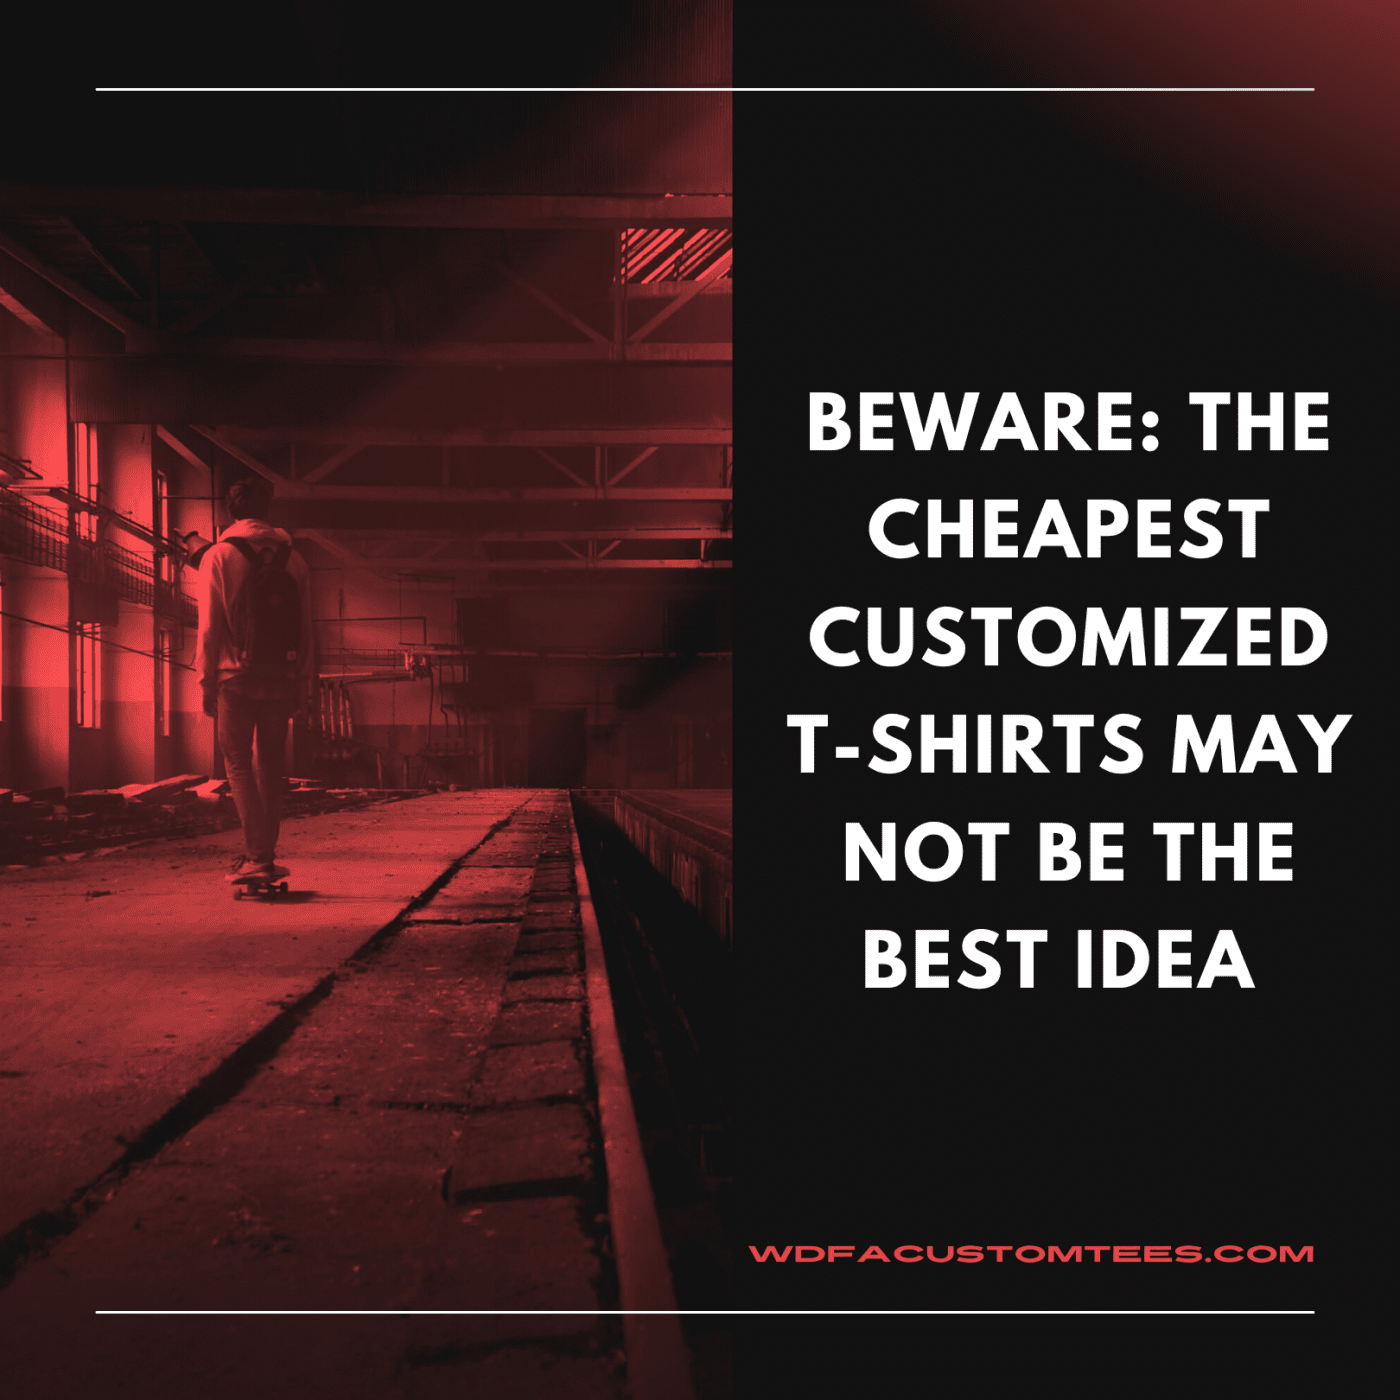 Beware - The Cheapest Customized T-Shirts May Not Be the Best Idea (Cheapest Customized T-Shirts), custom t shirts, t shirt printing, custom t-shirts, t-shirt printing, custom tshirts, tshirt printing, custom t shirts, t shirt printing